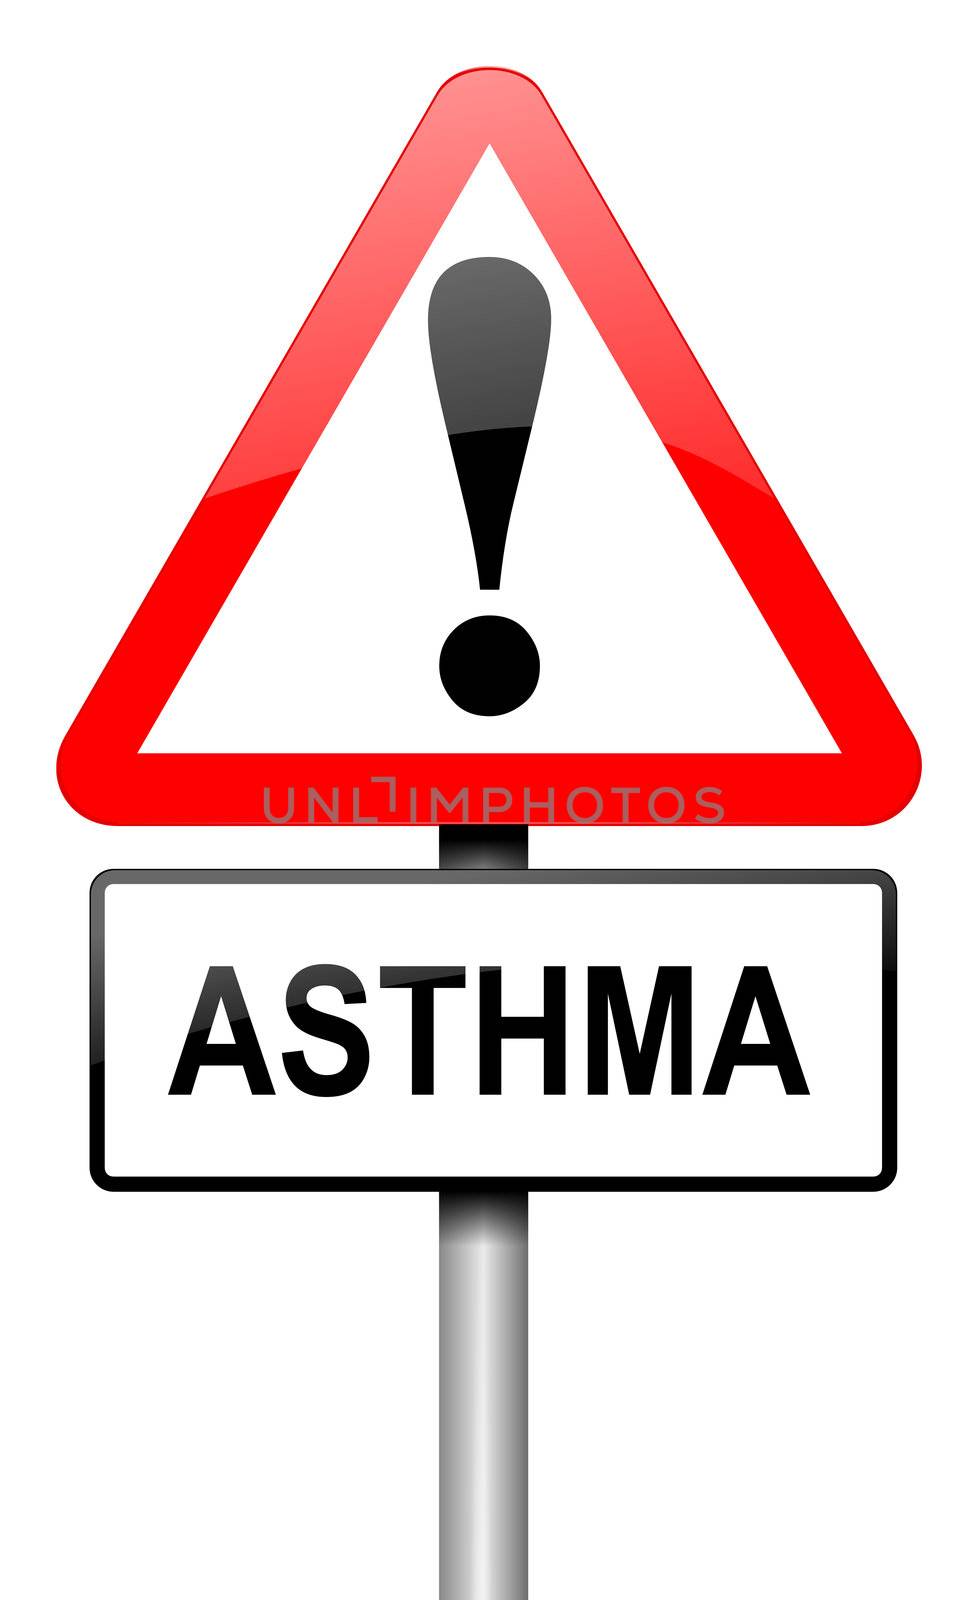 Asthma concept. by 72soul